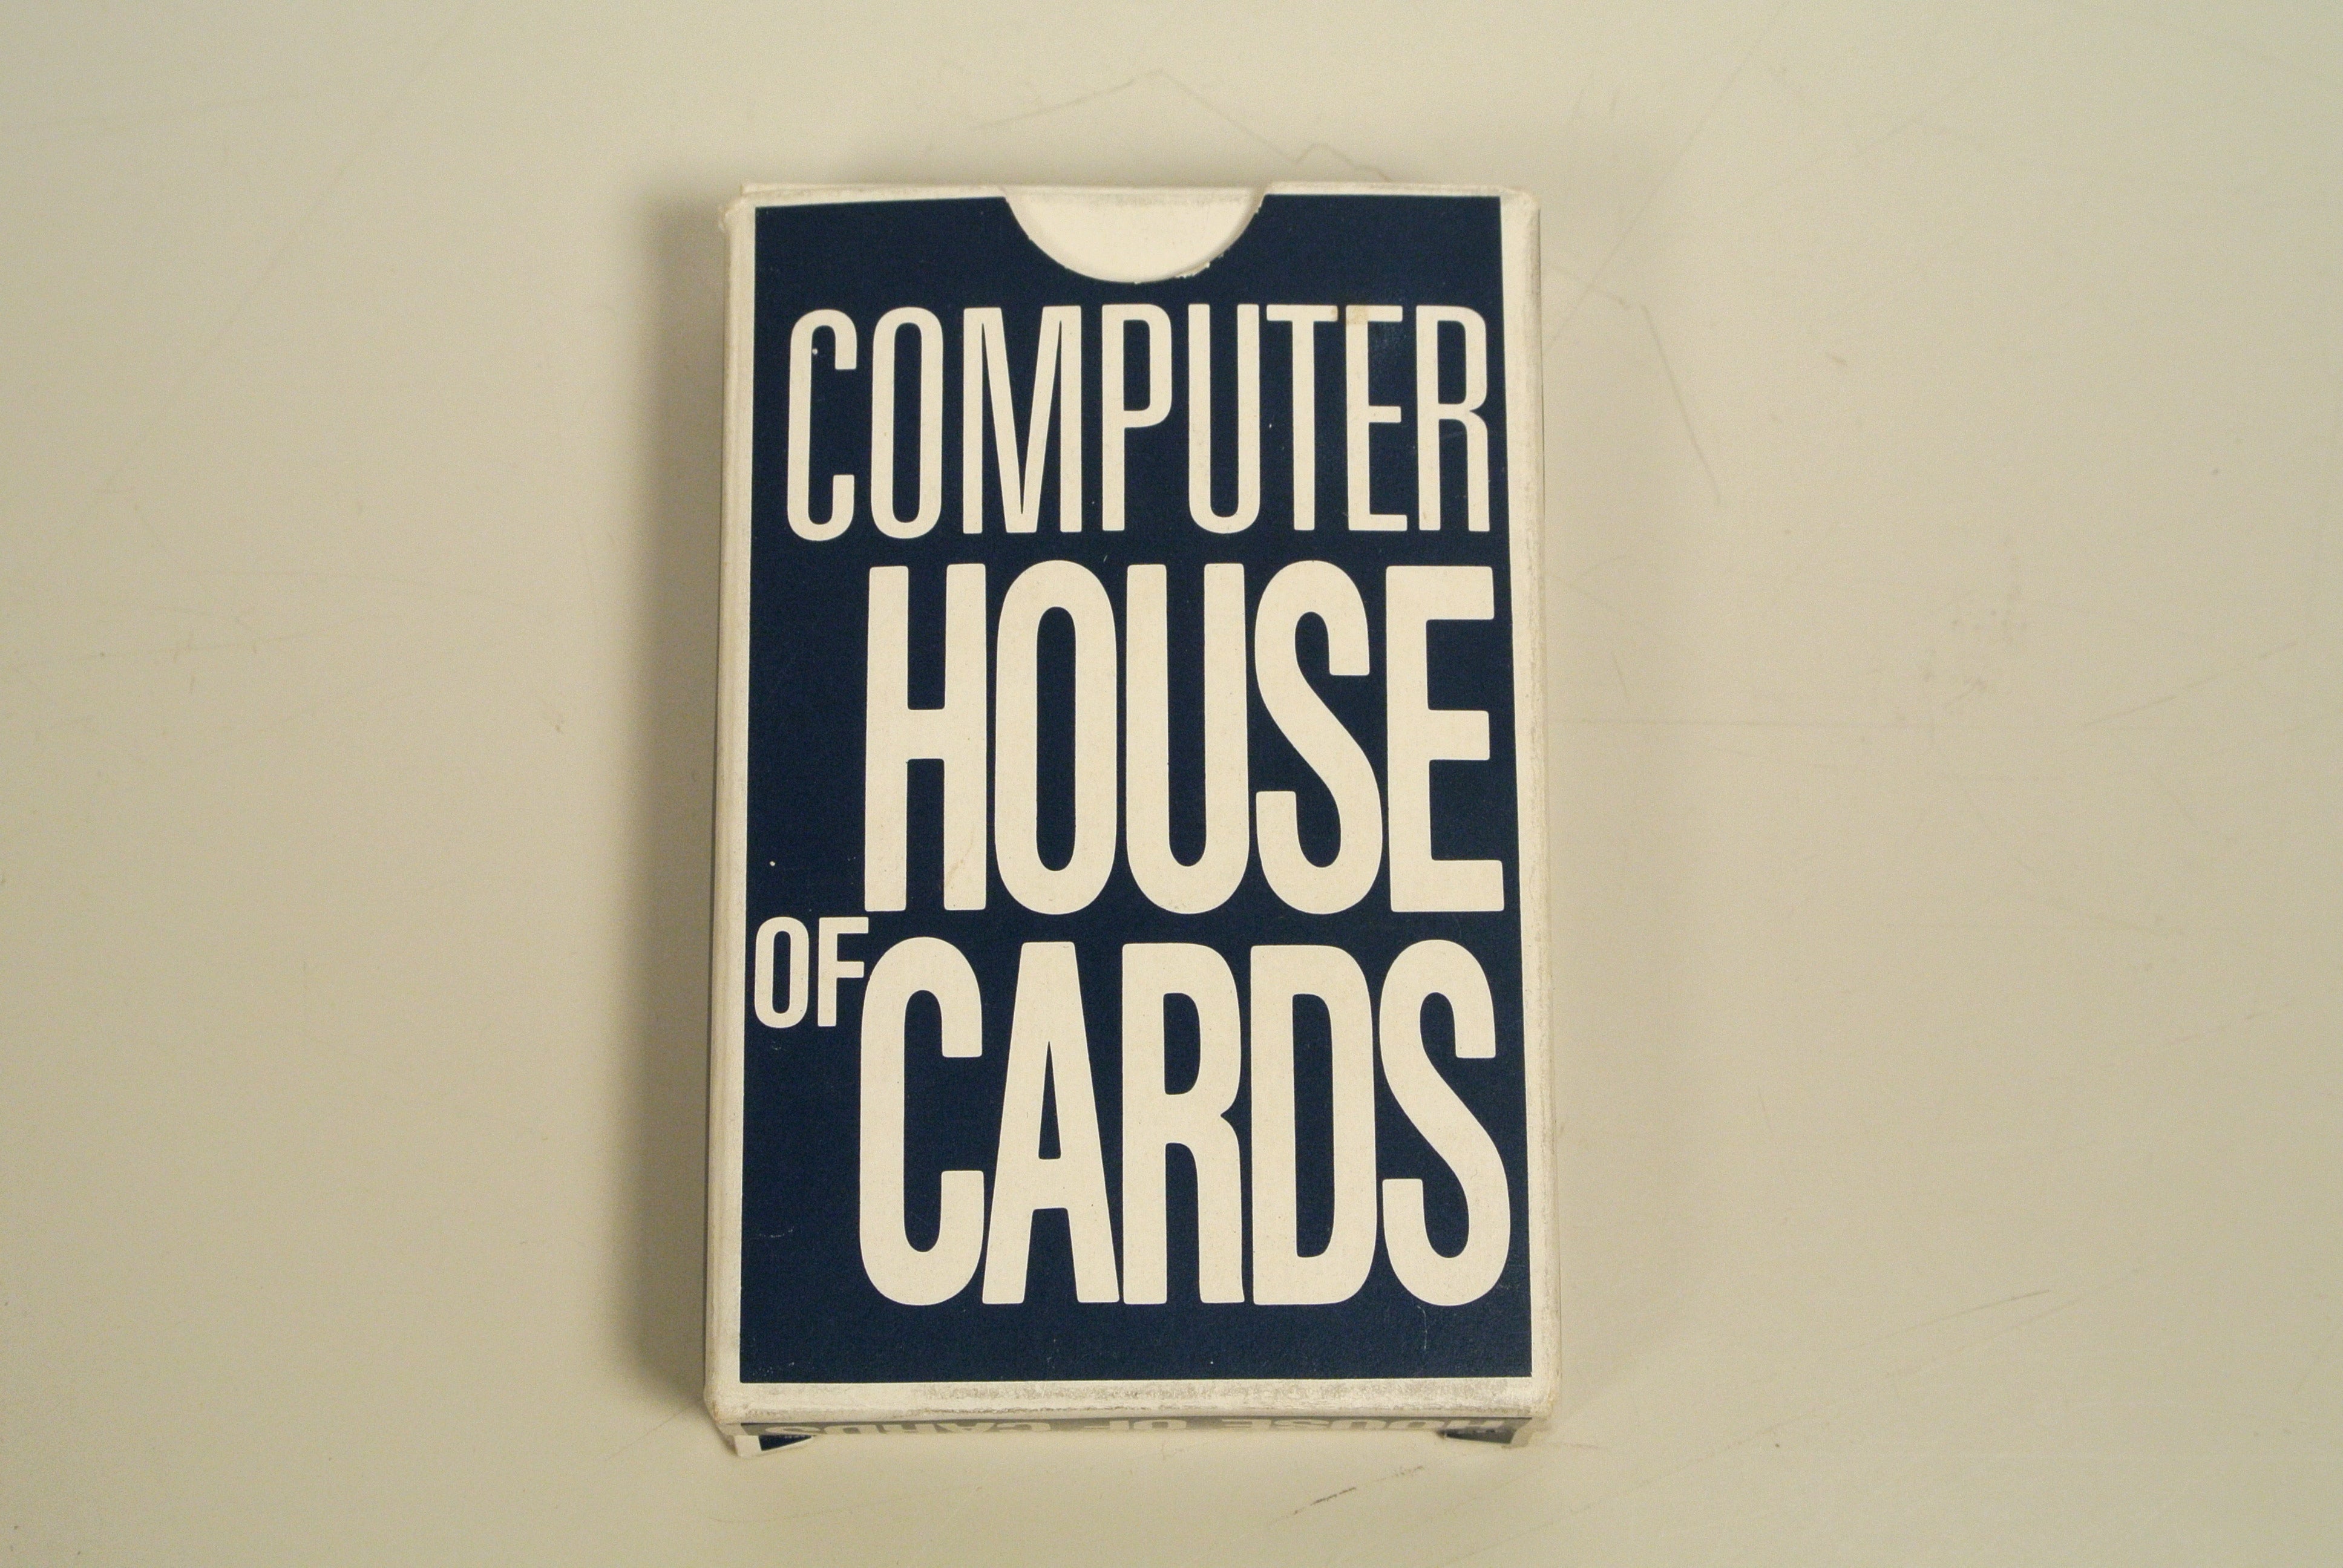 Charles Eames 'Computer' House of Cards IBM